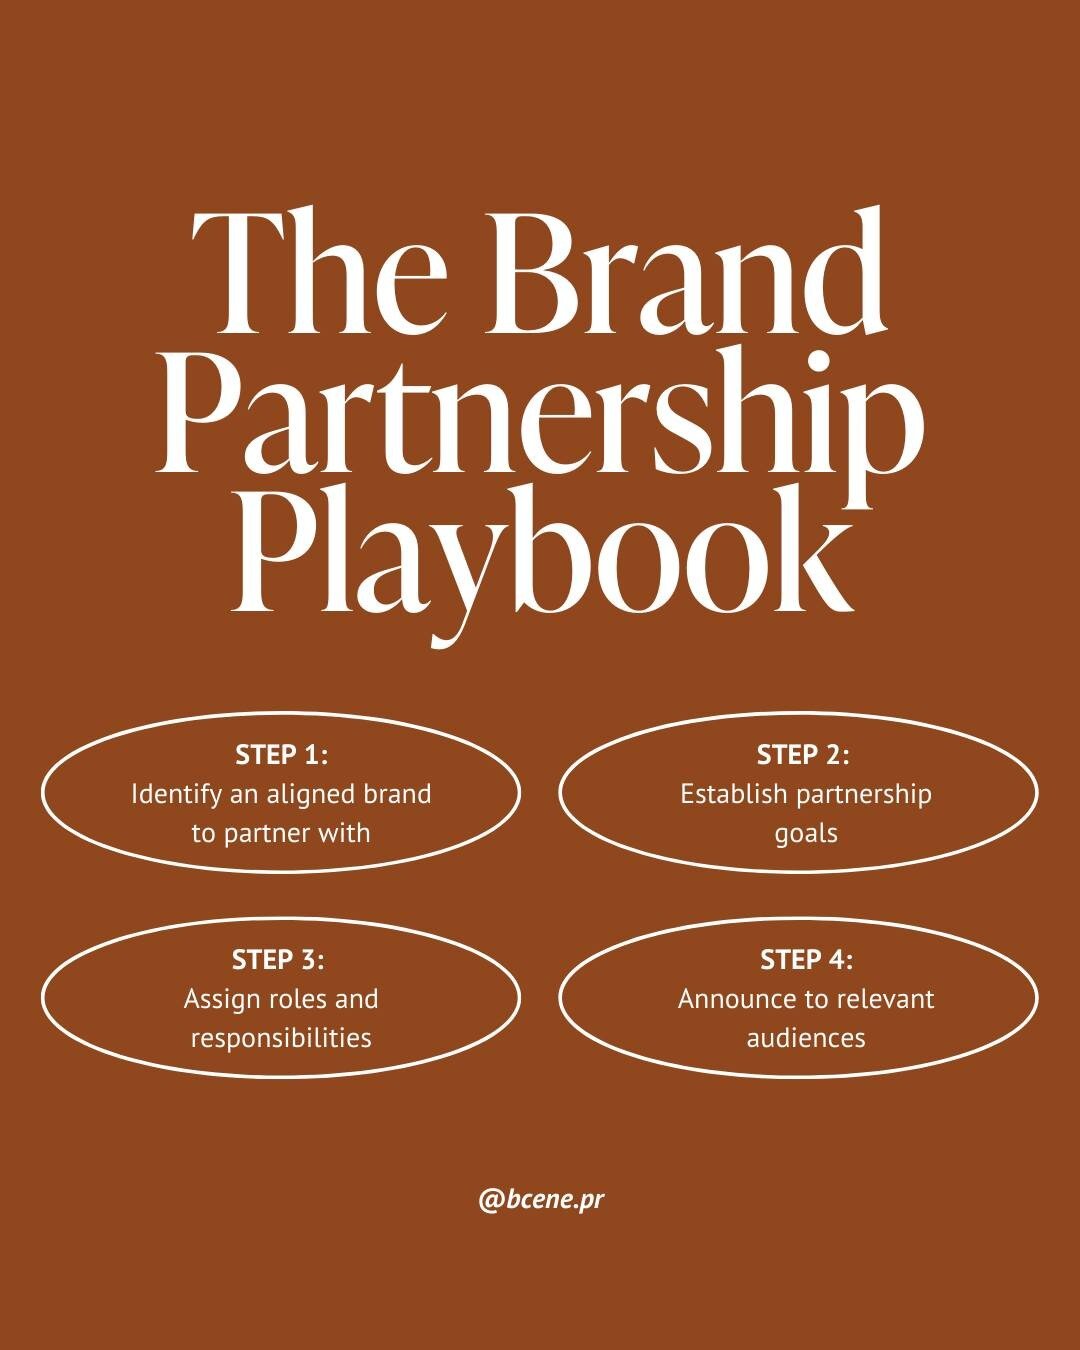 PSA 📢 Brand partnerships are one of the top organic ways to boost your brand awareness in 2022. Have no clue how to coordinate one? Here's your playbook ➡️

Brand partnerships are an AH-MAZING way to expand your audience 👯&zwj;♀️, increase sales 🤑